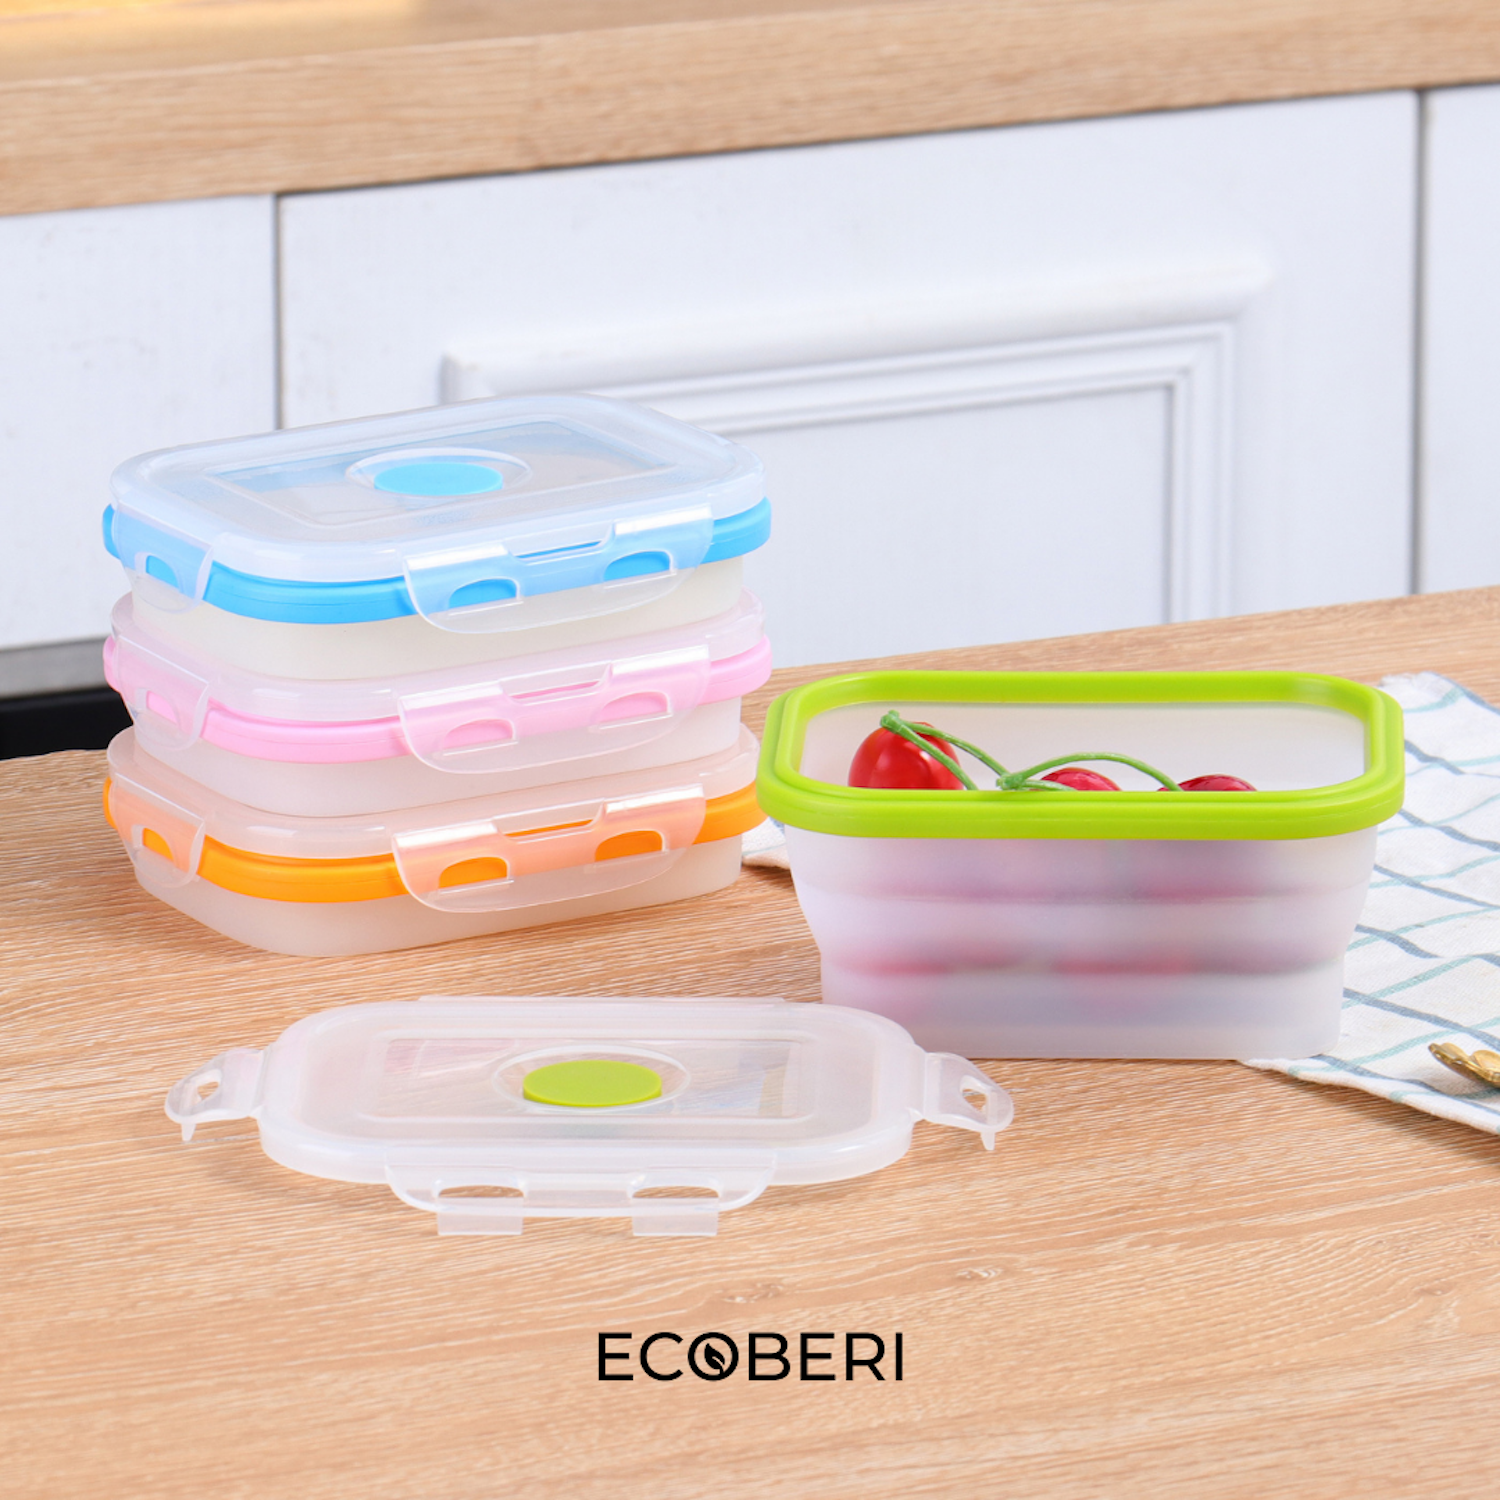 14 Meal Prep Containers Round 16oz. Reusable, Microwavable, Dishwasher  Safe, Convenient, and BPA Free 